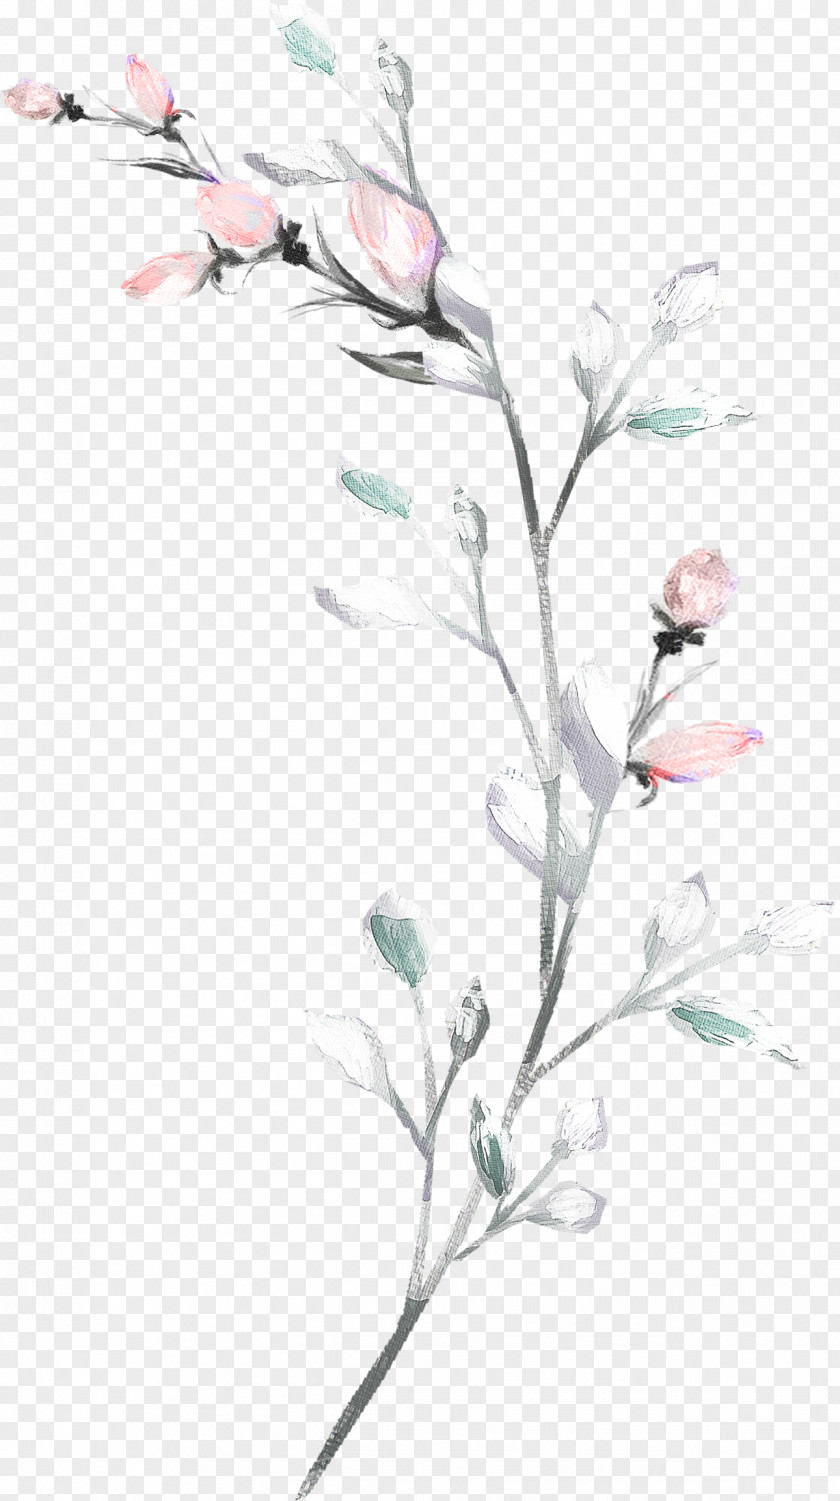 Wildflower Blossom Watercolor Flower Background PNG